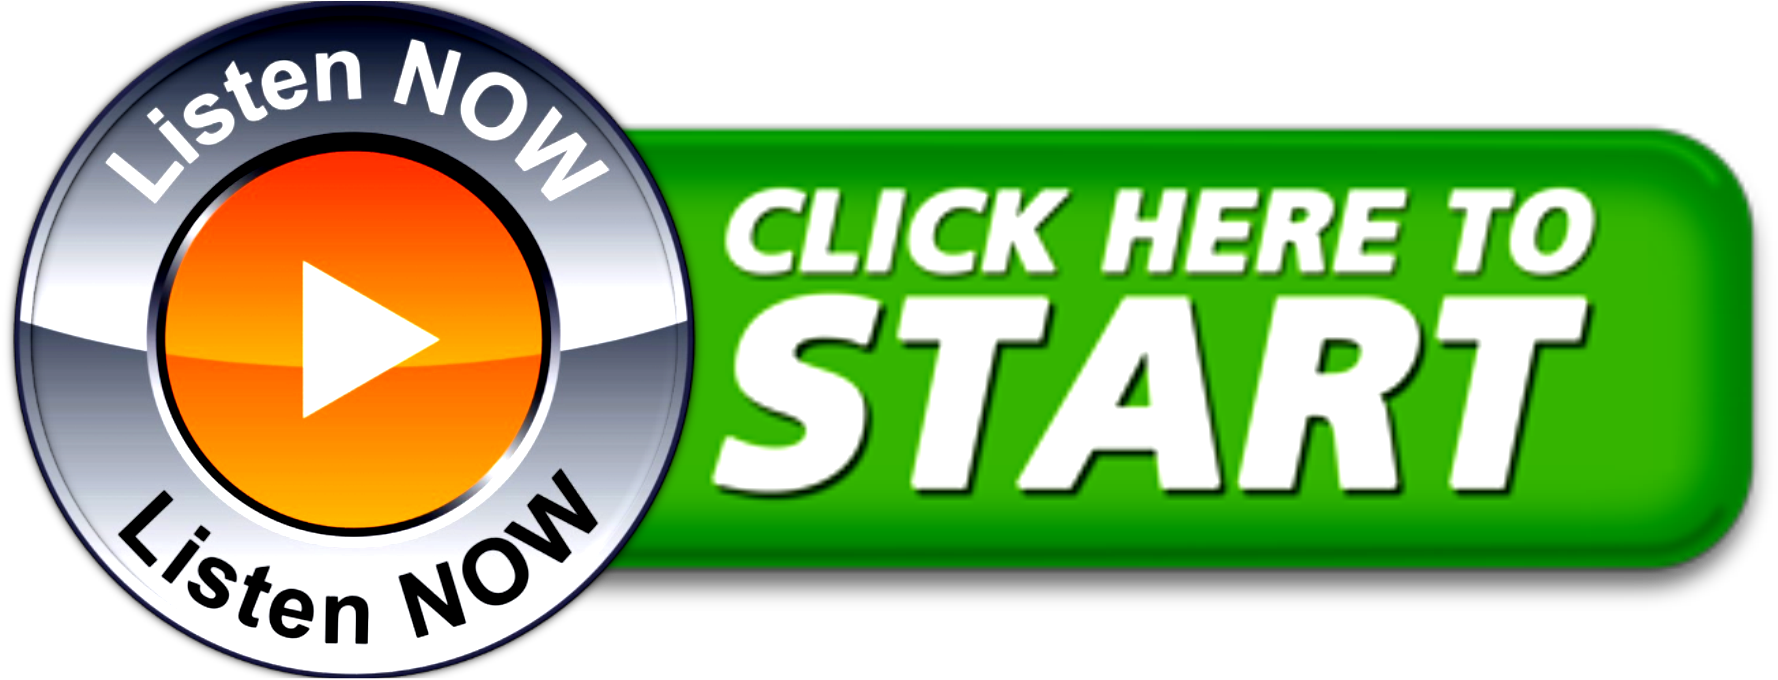 Get Started Now Button PNG Free Image